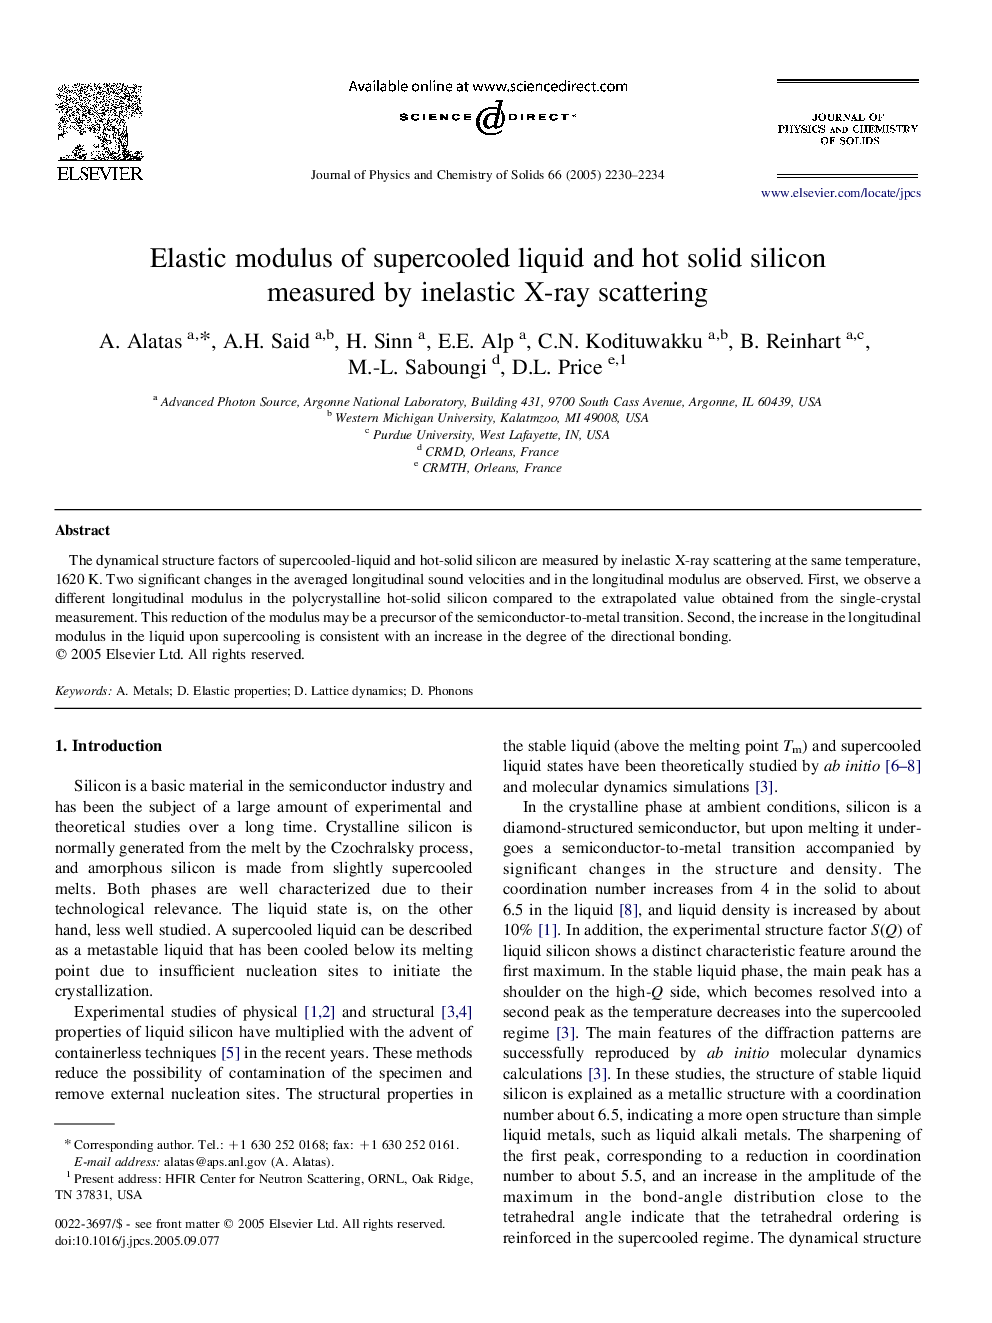 Elastic modulus of supercooled liquid and hot solid silicon measured by inelastic X-ray scattering